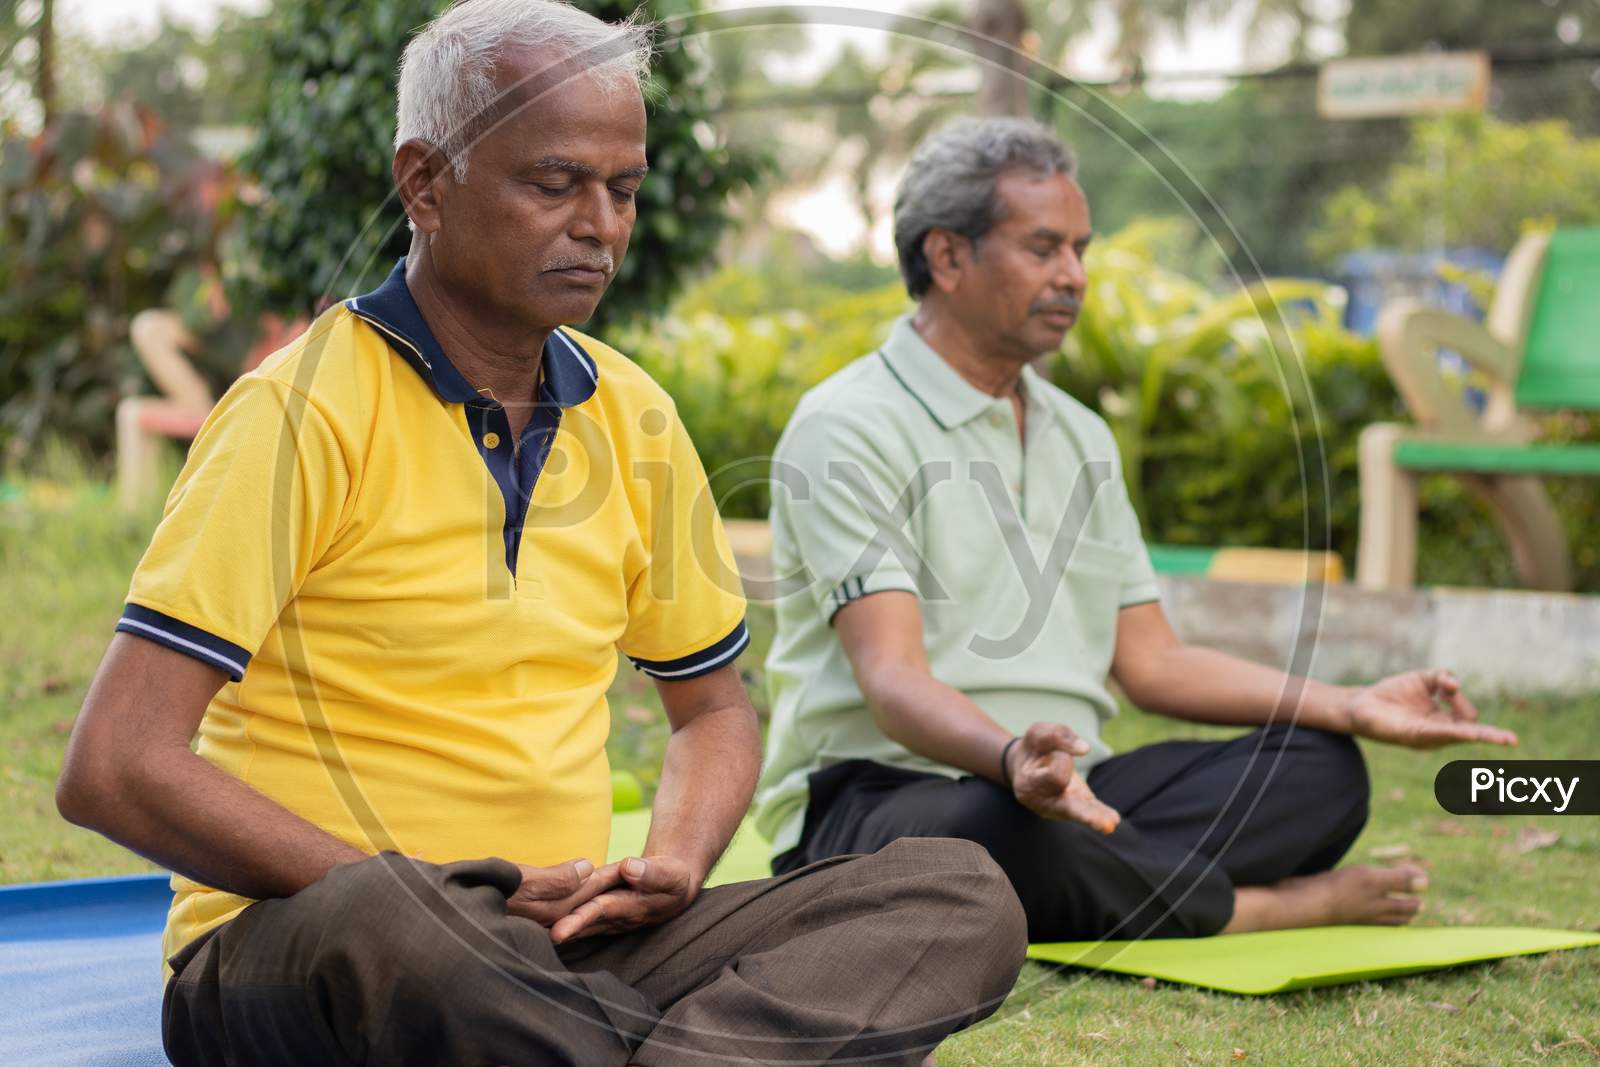 A Couple Of Elderly Man Or Old Men'S Doing Yoga, Fitness Routine At Outdoors